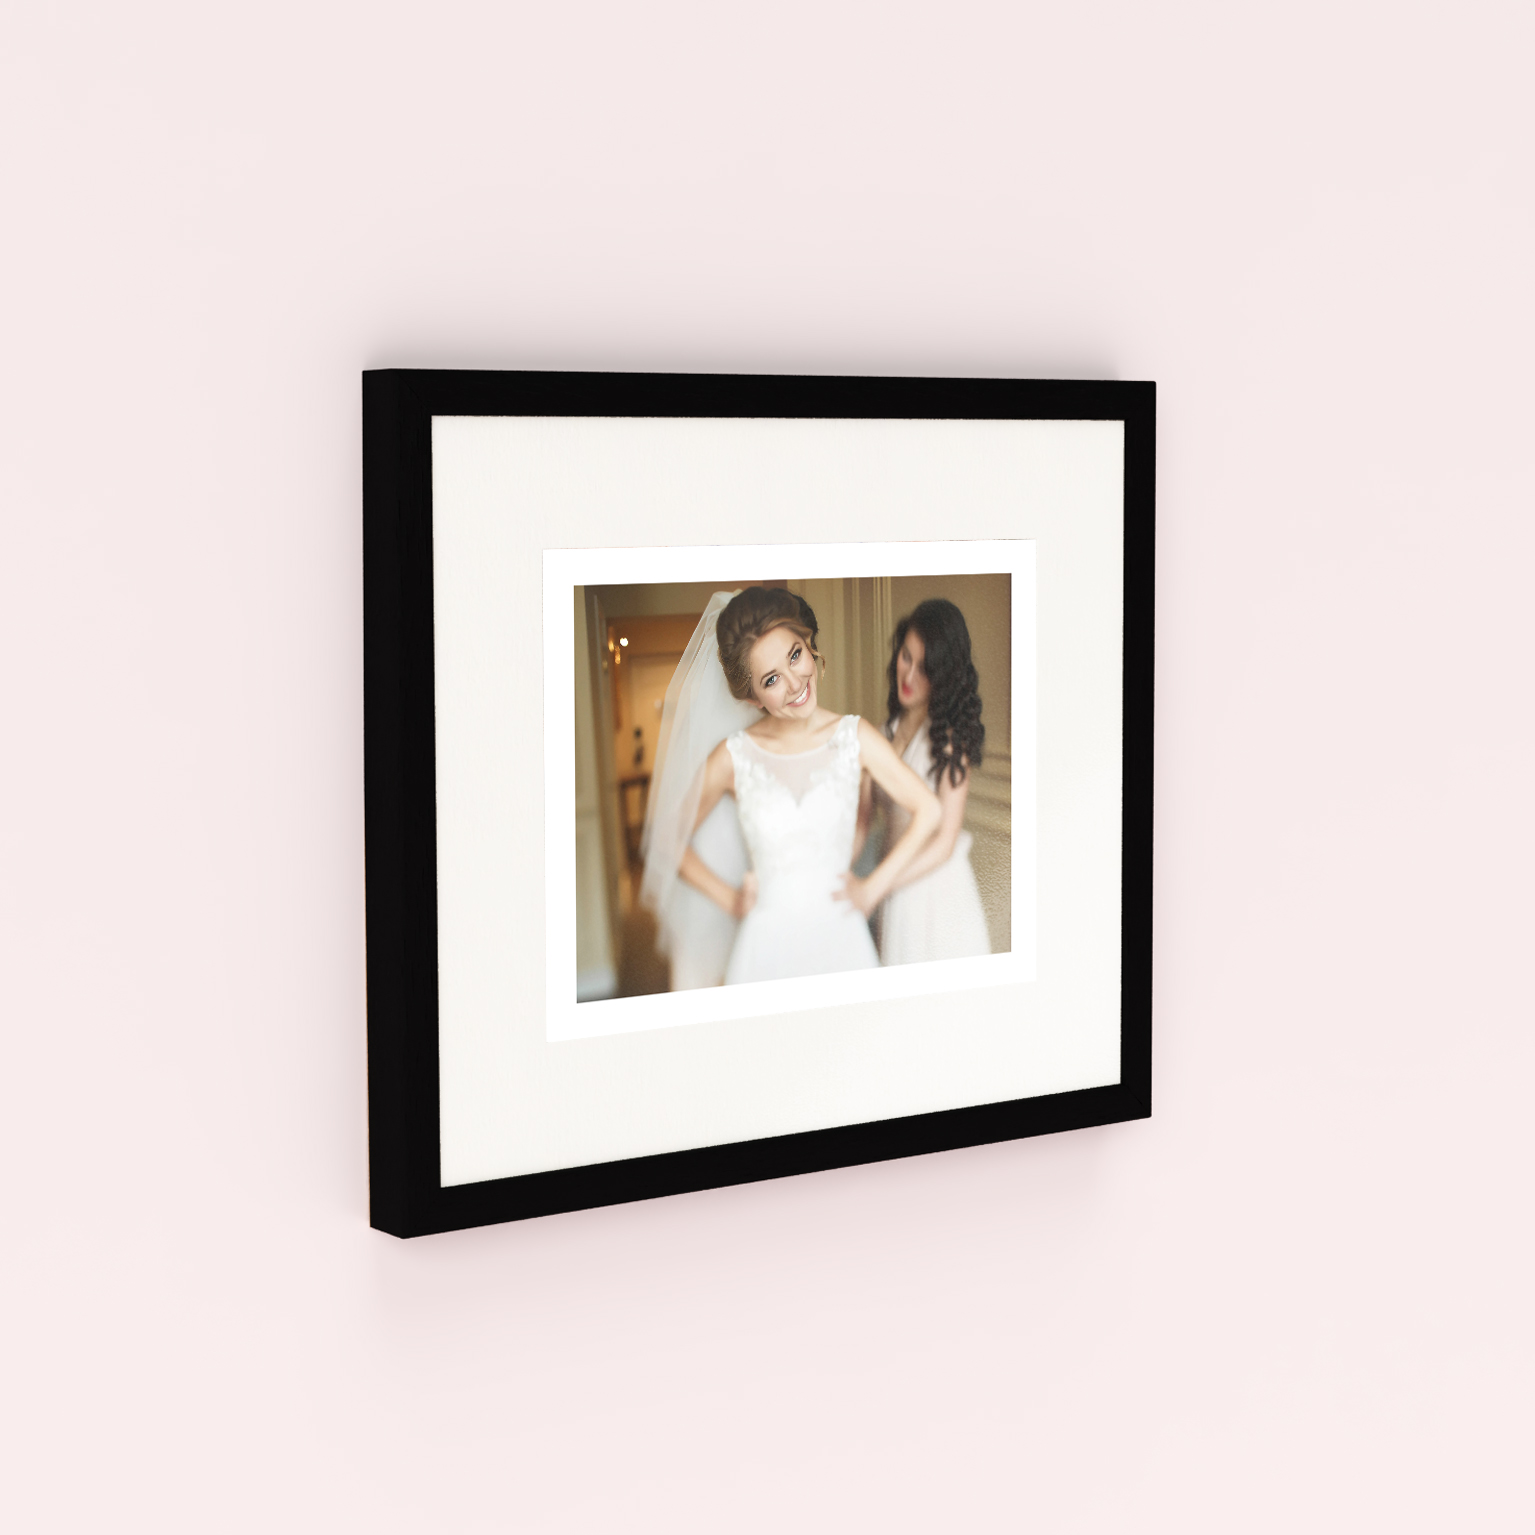 Landscape White Framed Photo Print - Capture the love and joy of your wedding day with a personalized keepsake.